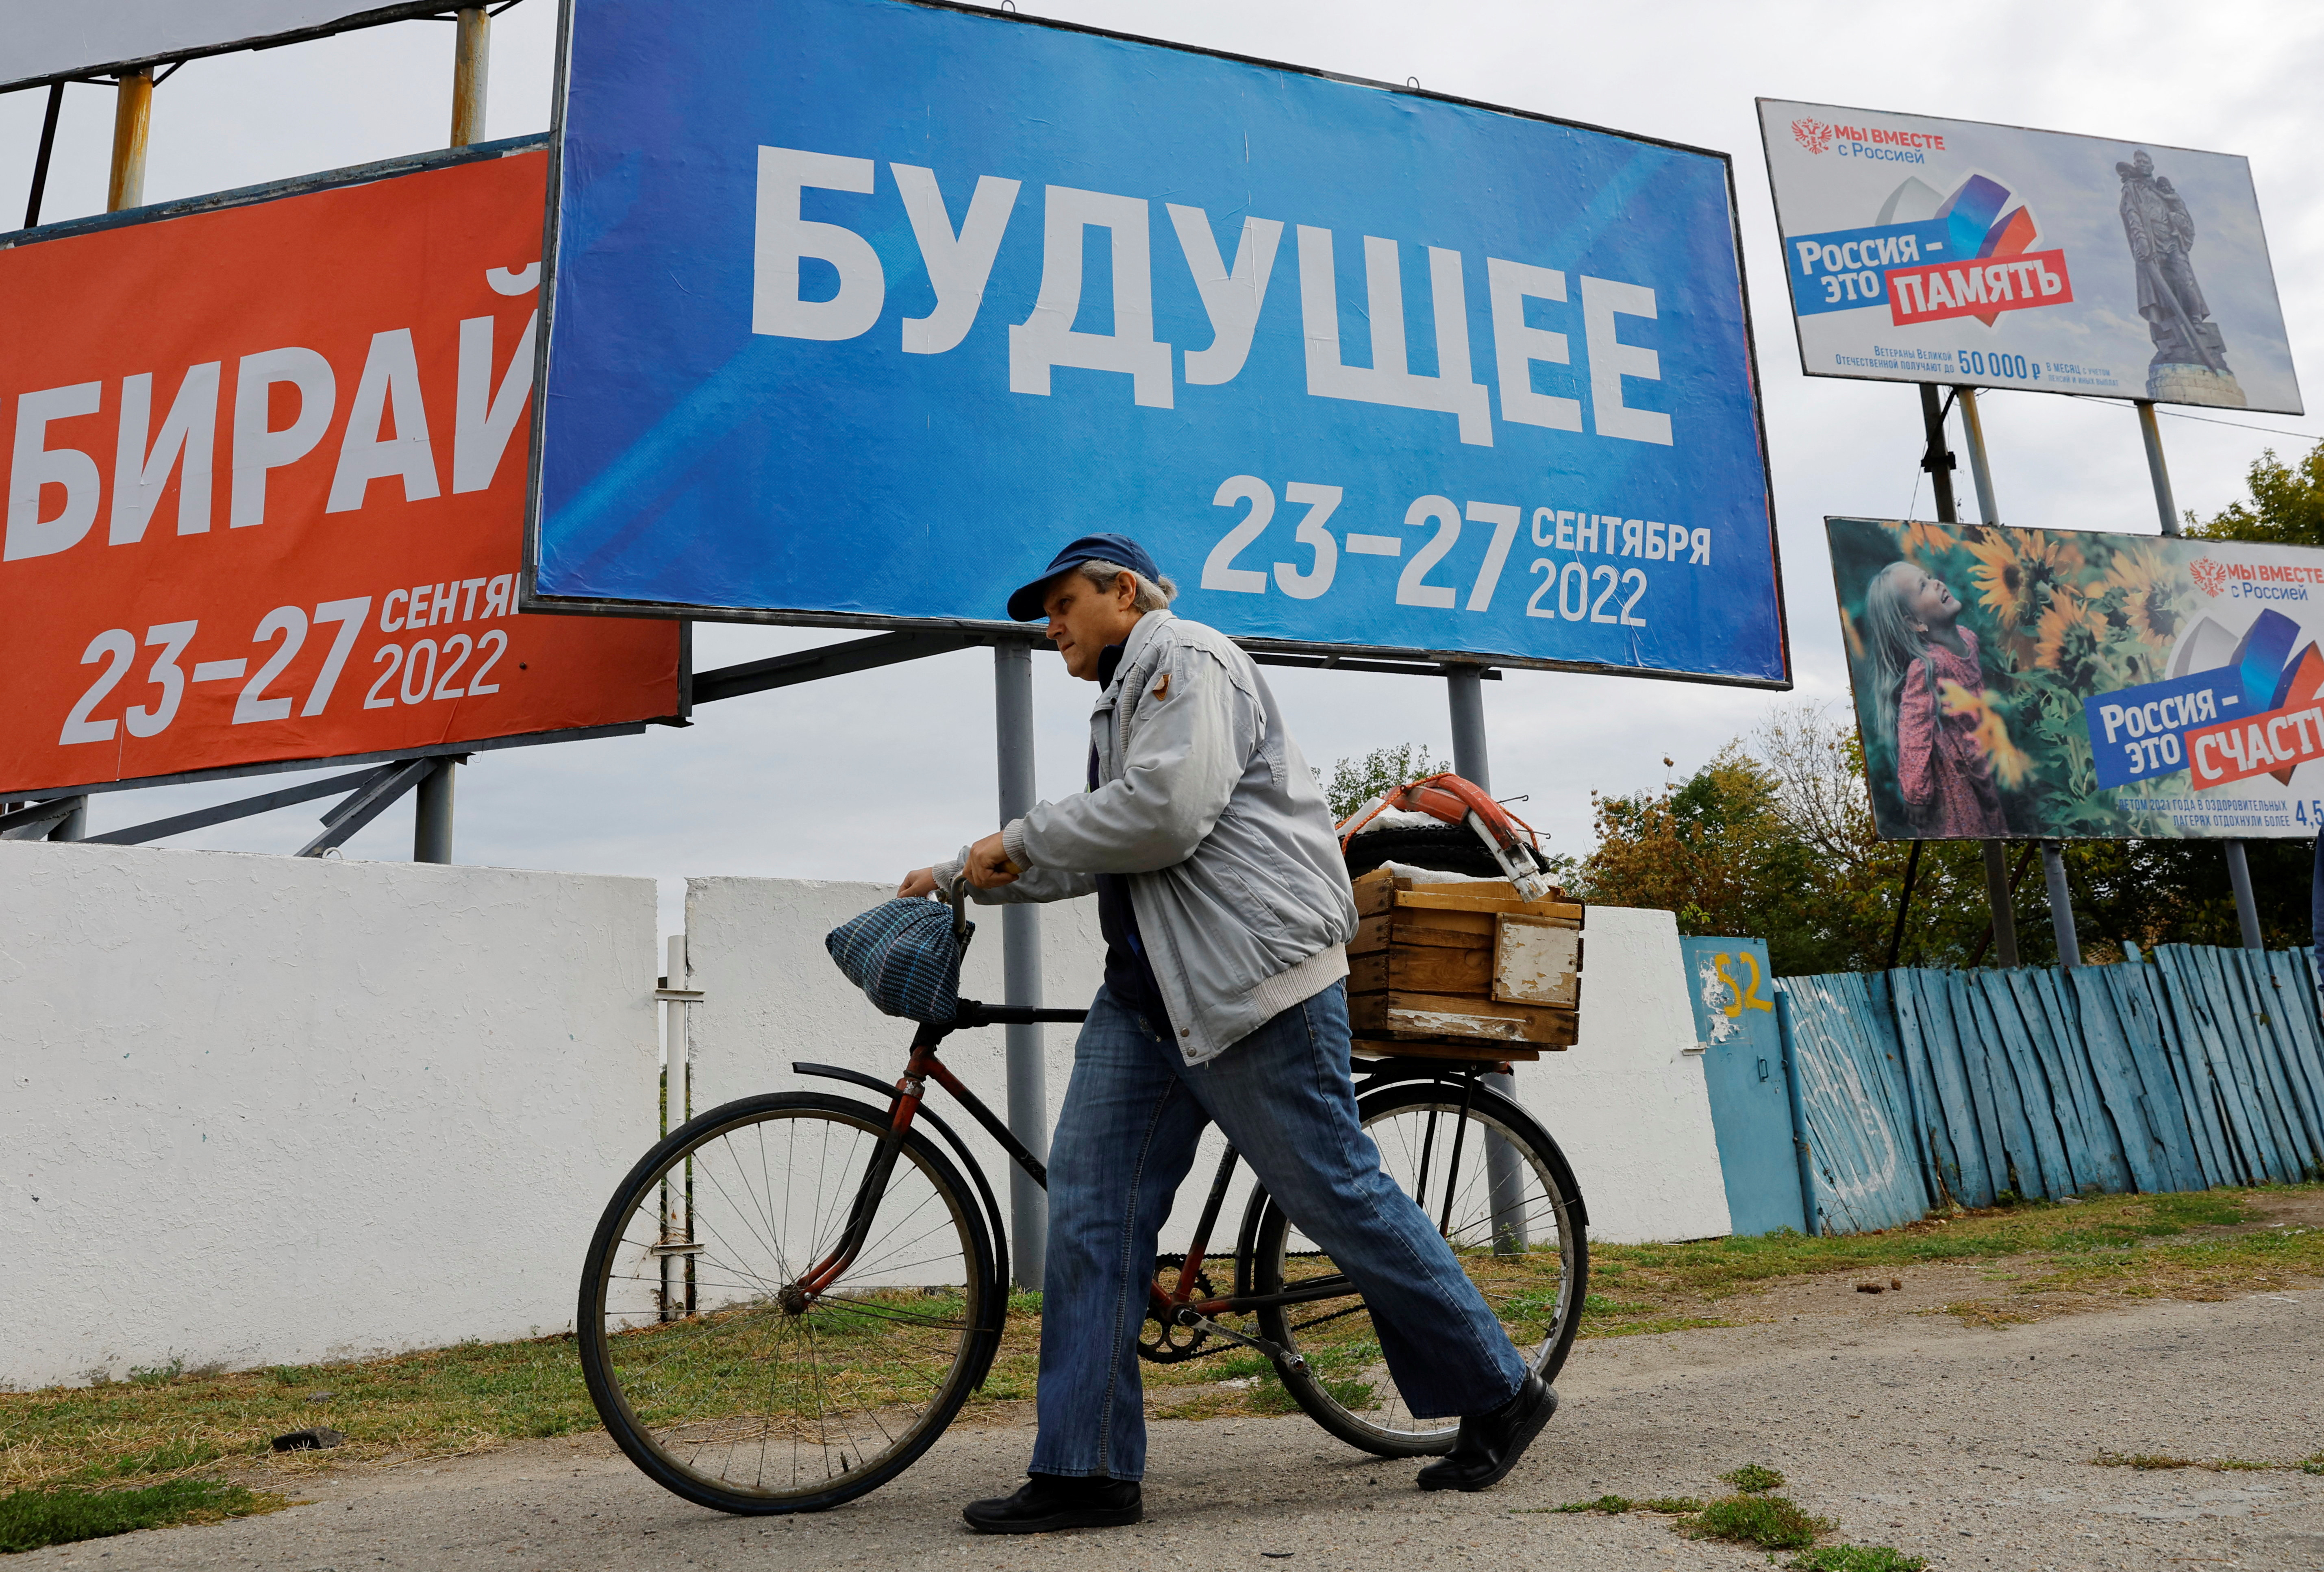 Russian-controlled Zaporizhzhia region in Ukraine holds vote on joining Russia